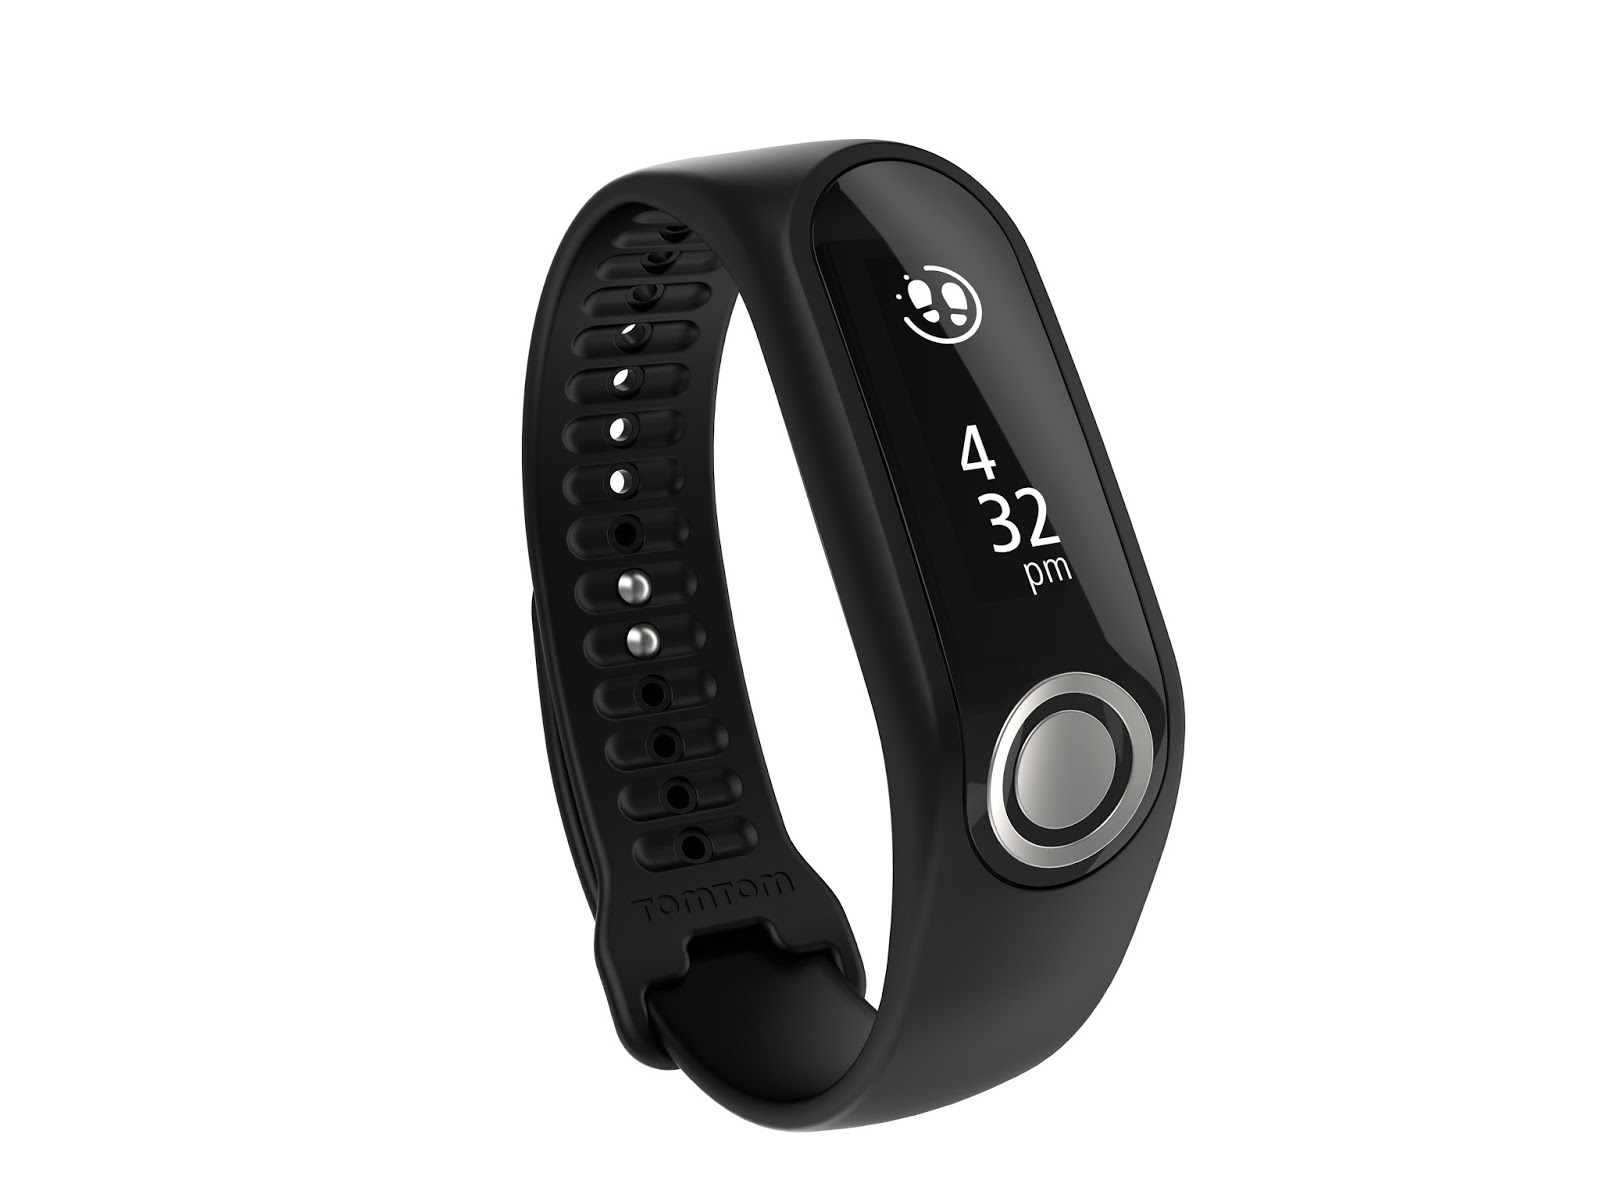 review-the-tomtom-touch-body-composition-fitness-tracker-mother-distracted